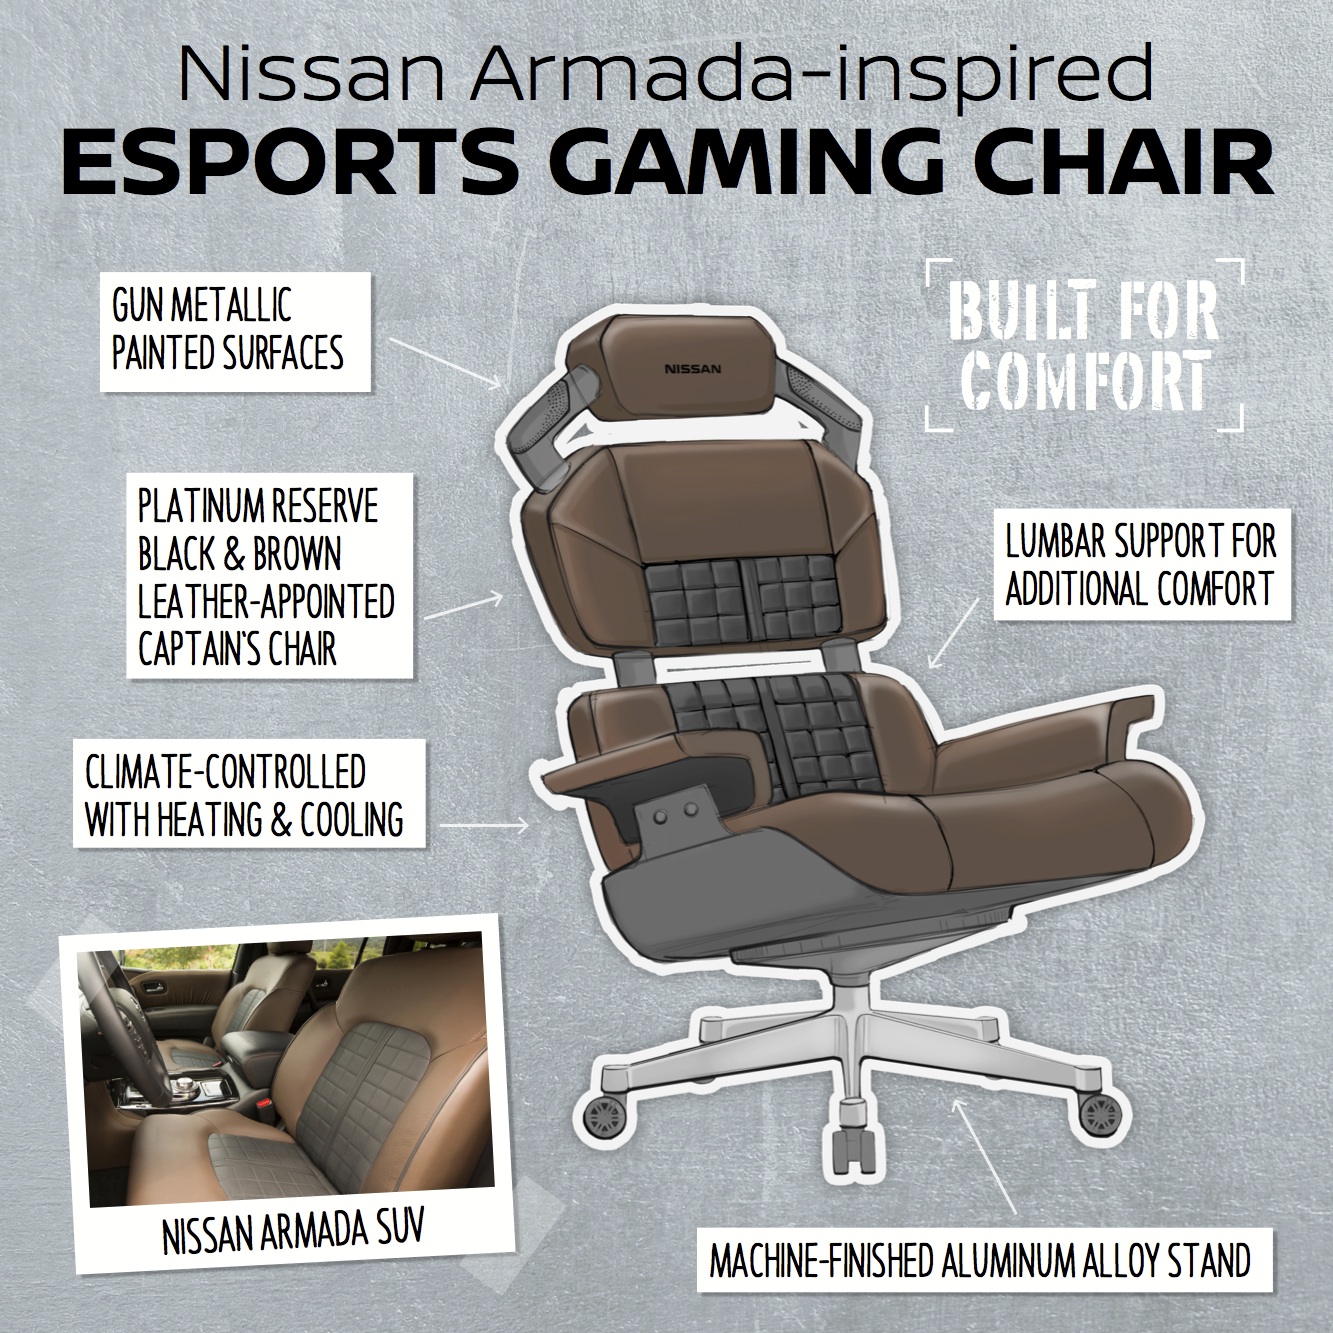 Nissan's ultimate esports gaming chairs 